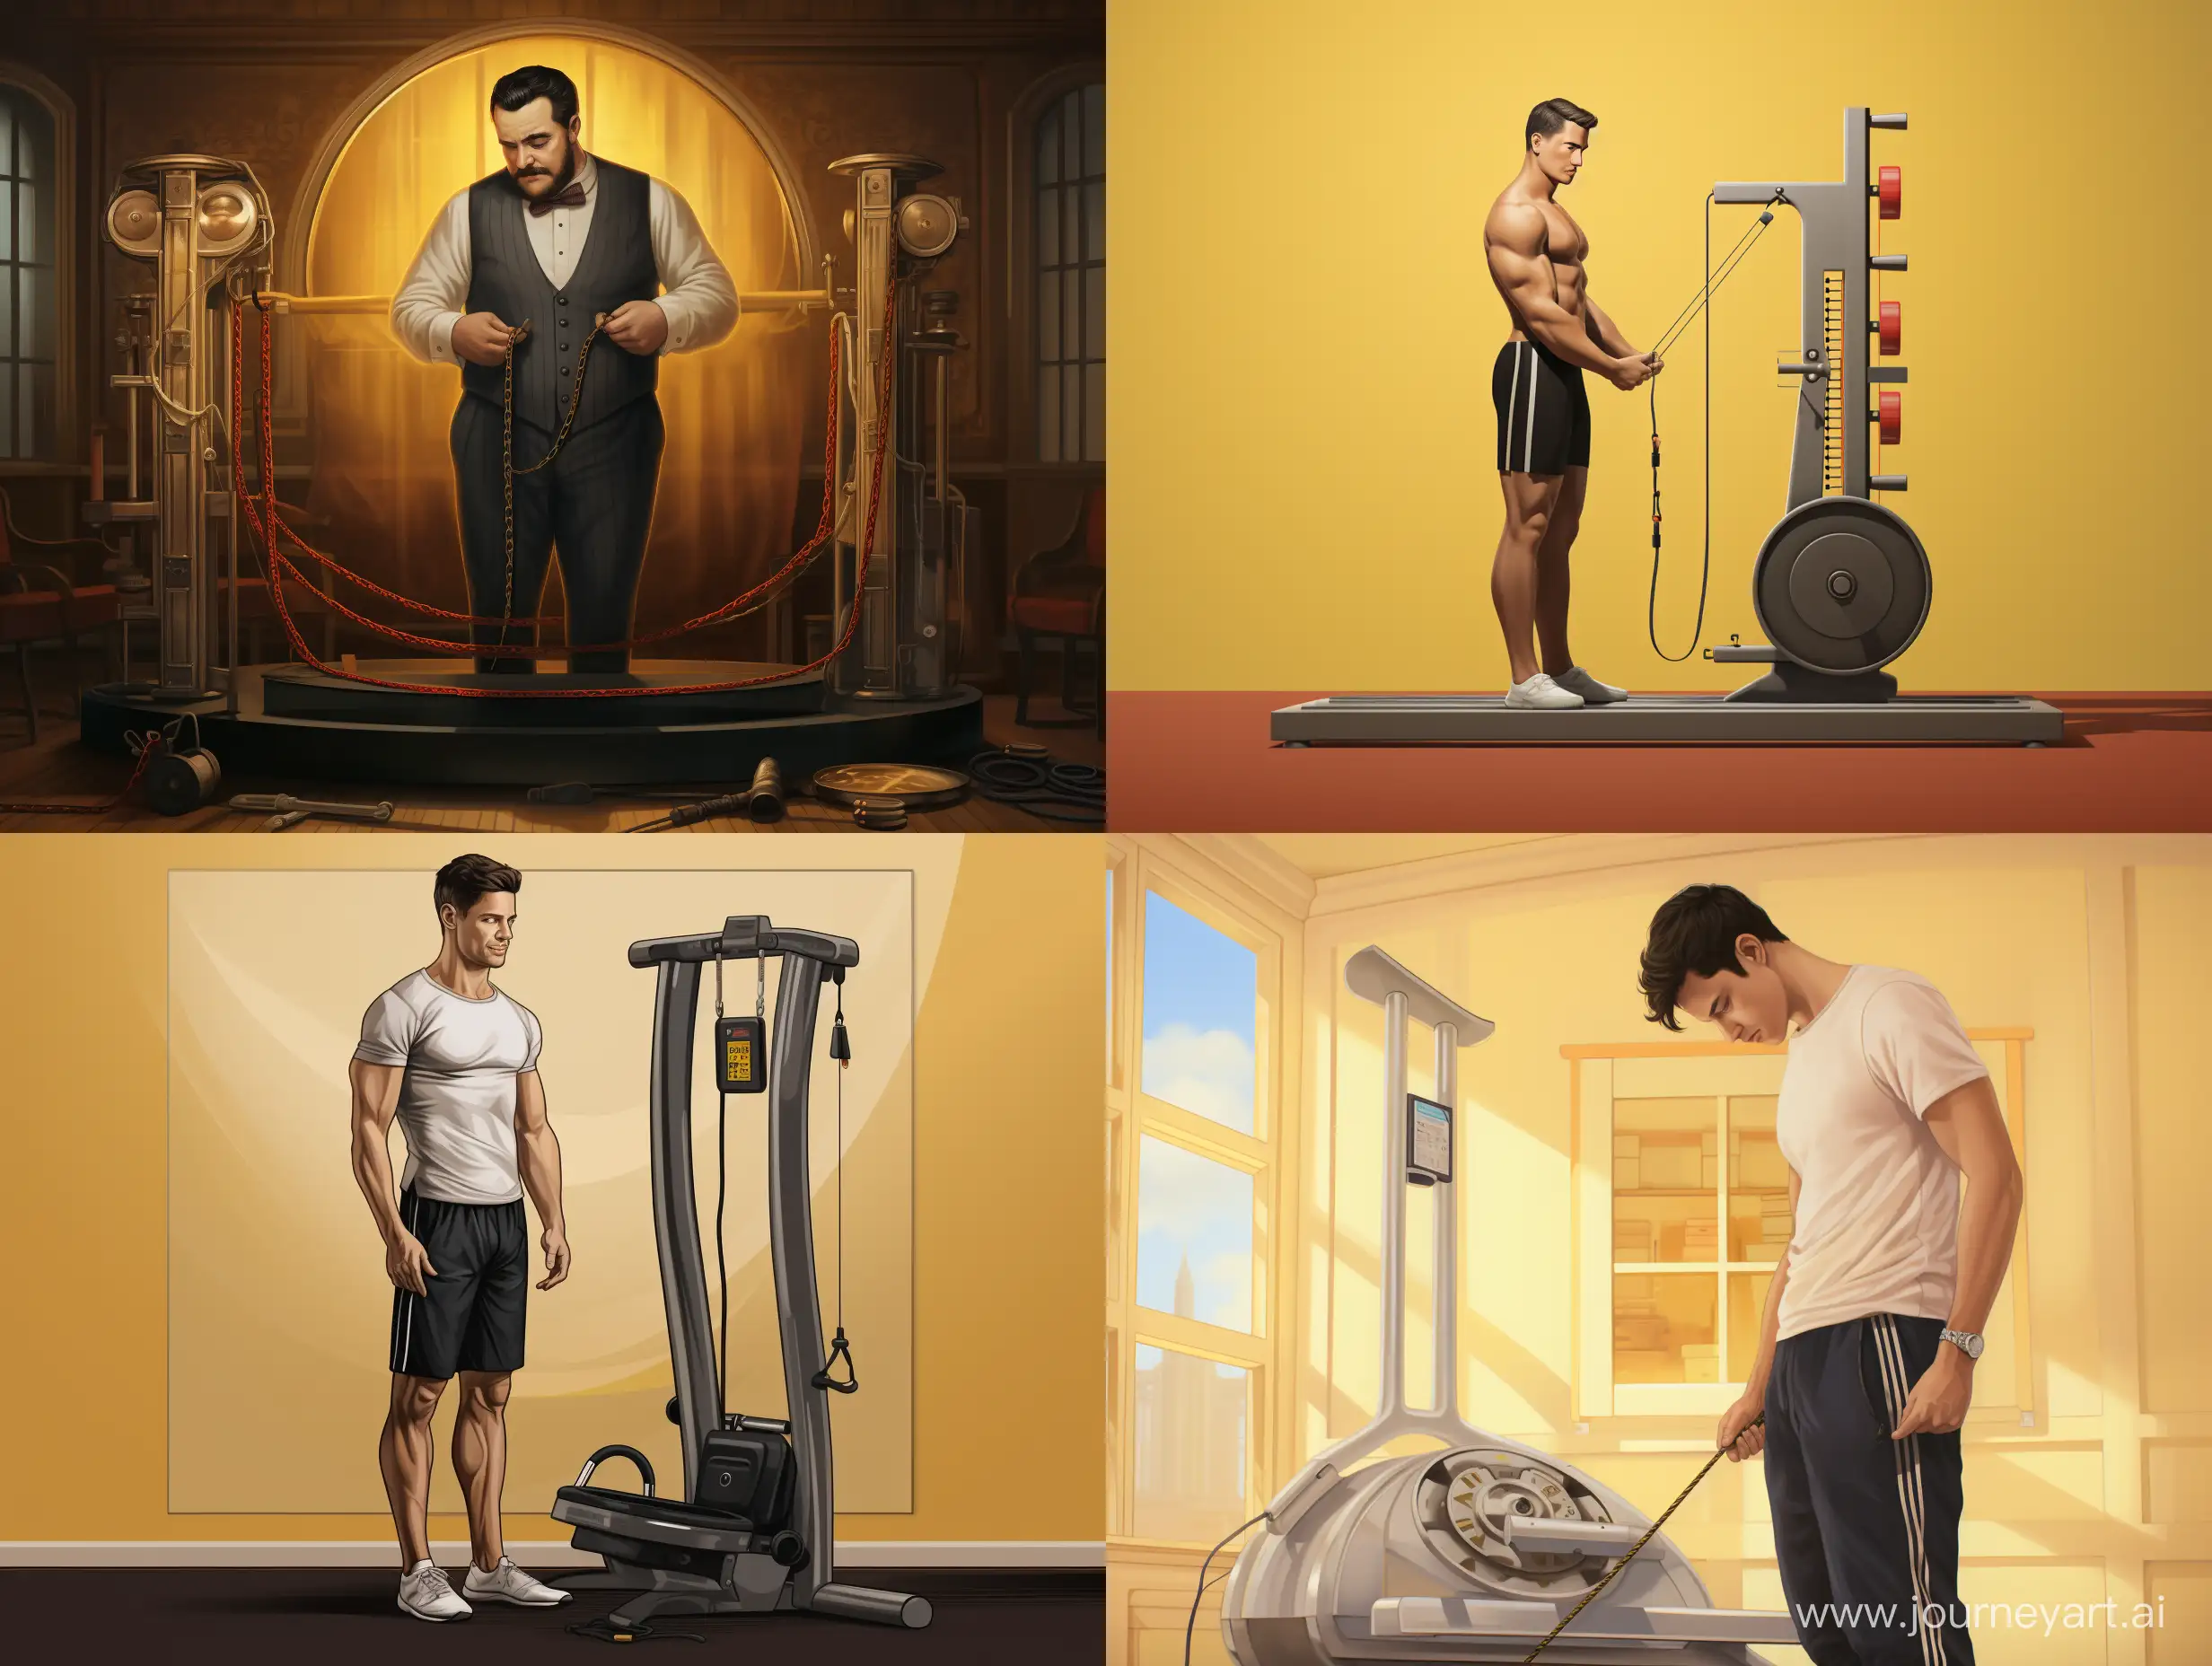 make a man checking his stomach with measuring tape while standing on a weight machine in portrait